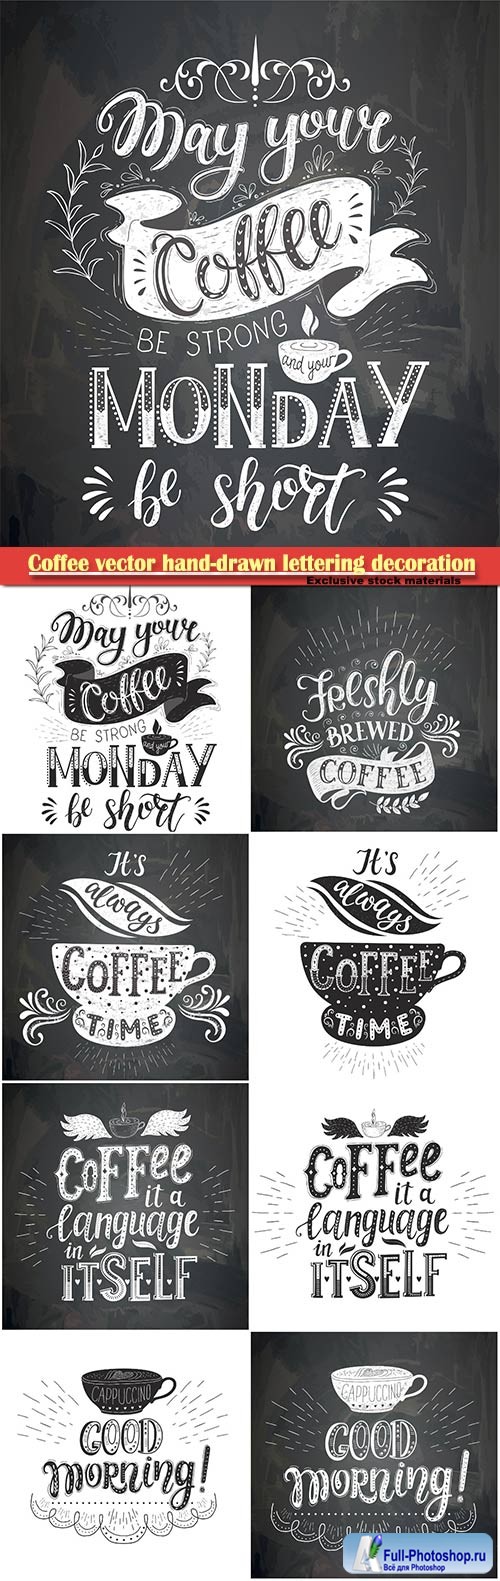 Coffee vector hand-drawn lettering decoration for restaurant and bar